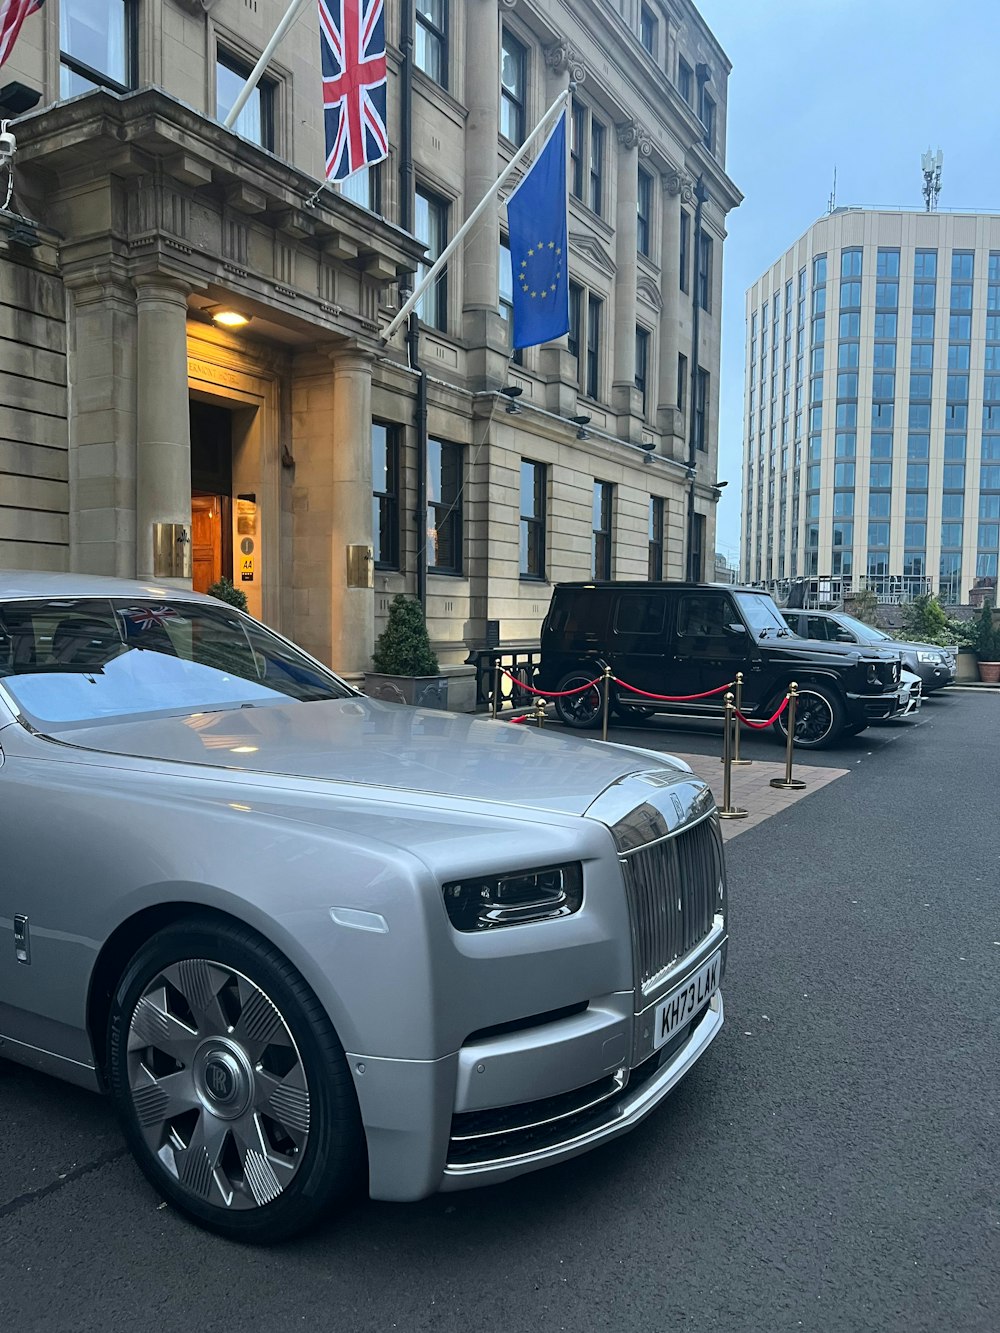 a silver rolls royce parked in front of a building